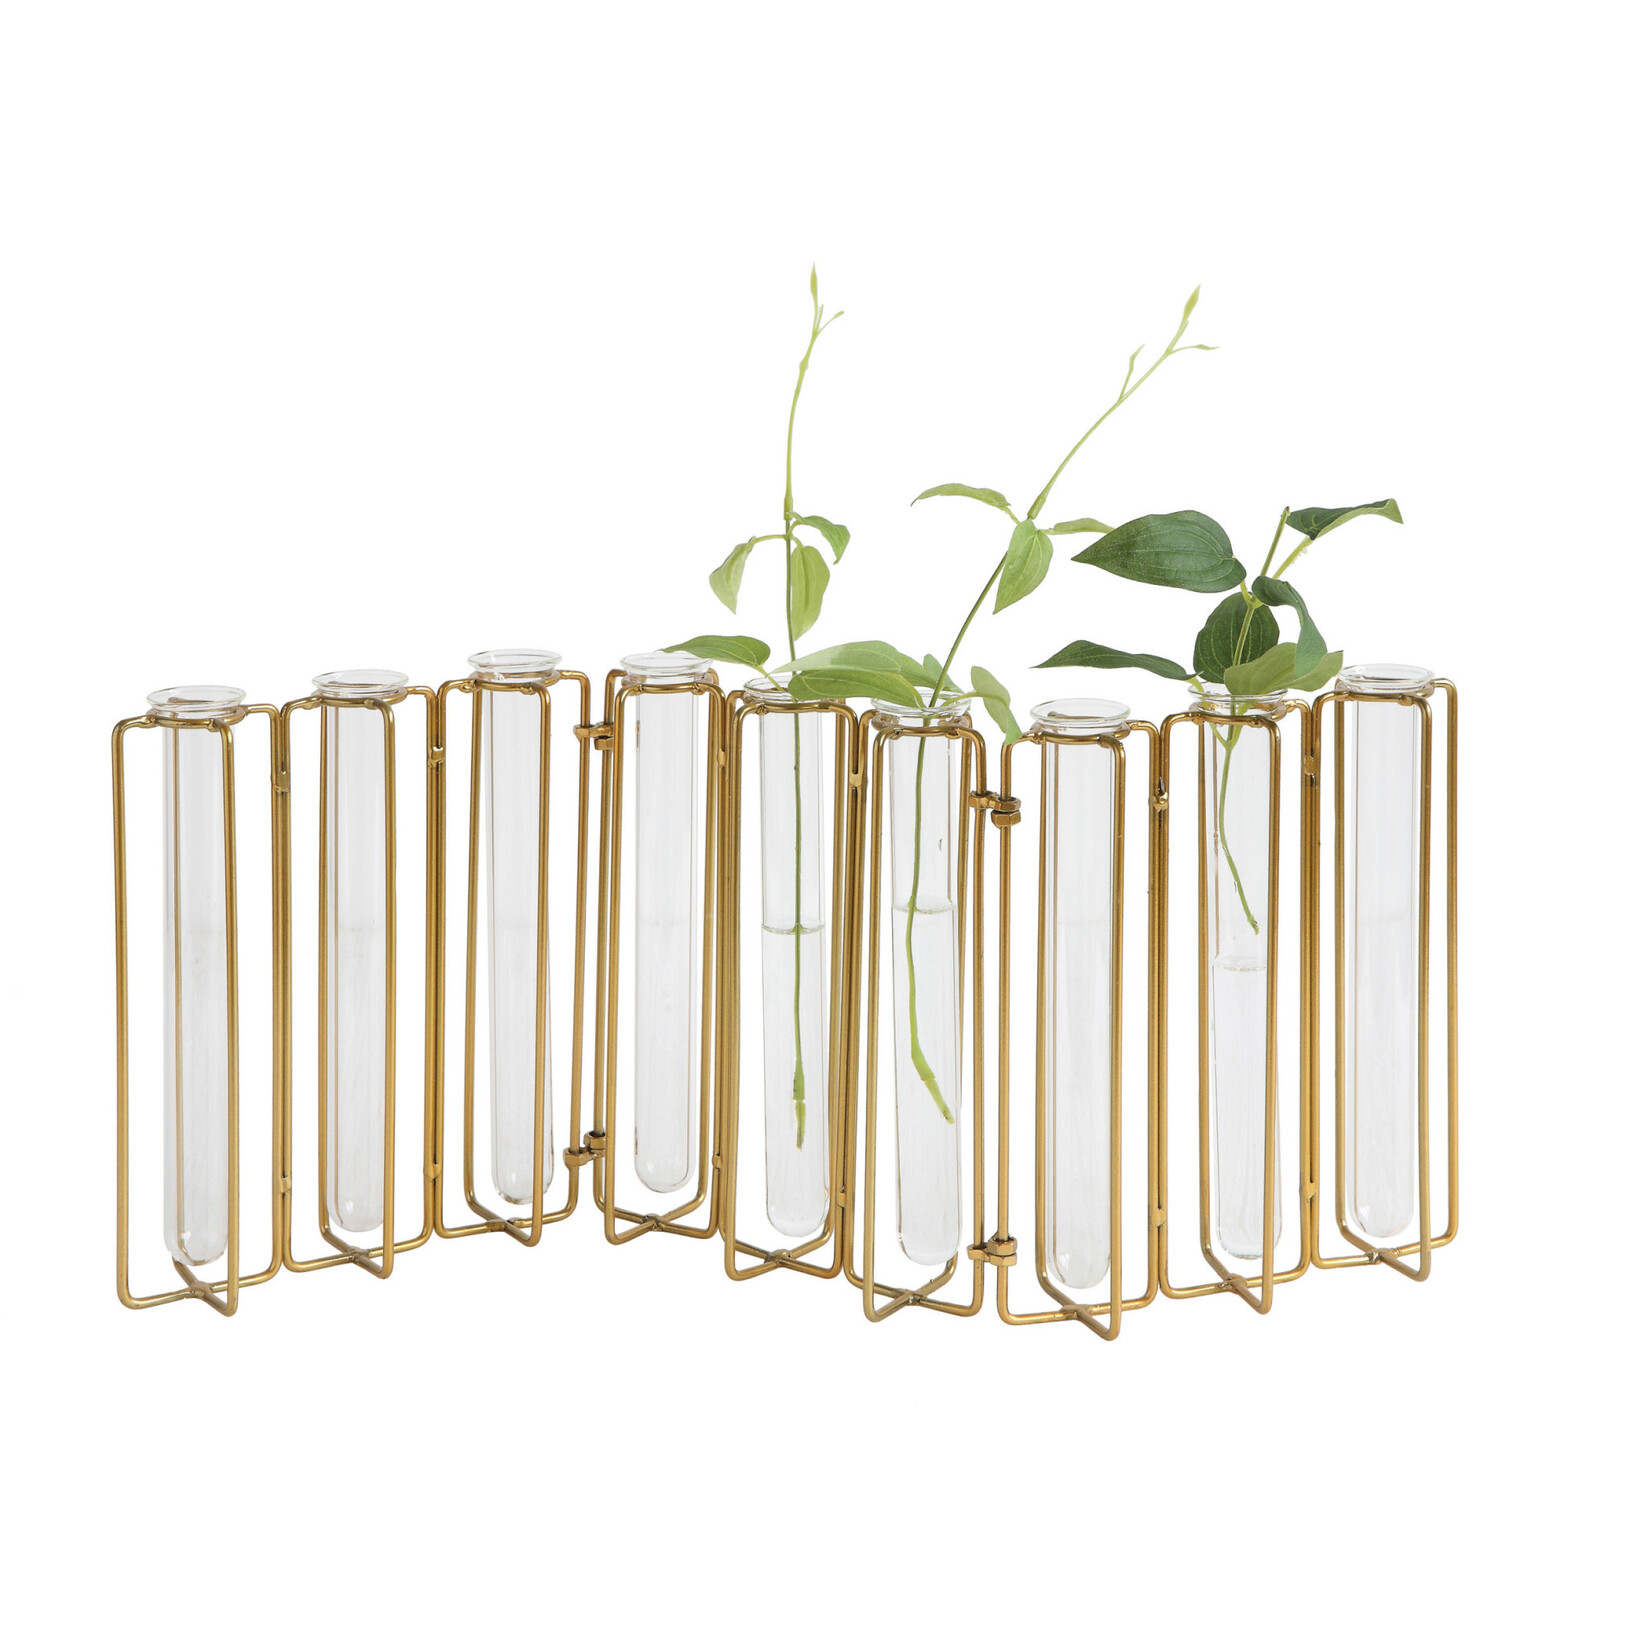 Creative Co-Op Metal and Glass Jointed Vase, Gold Finish w 9 Test Tubes